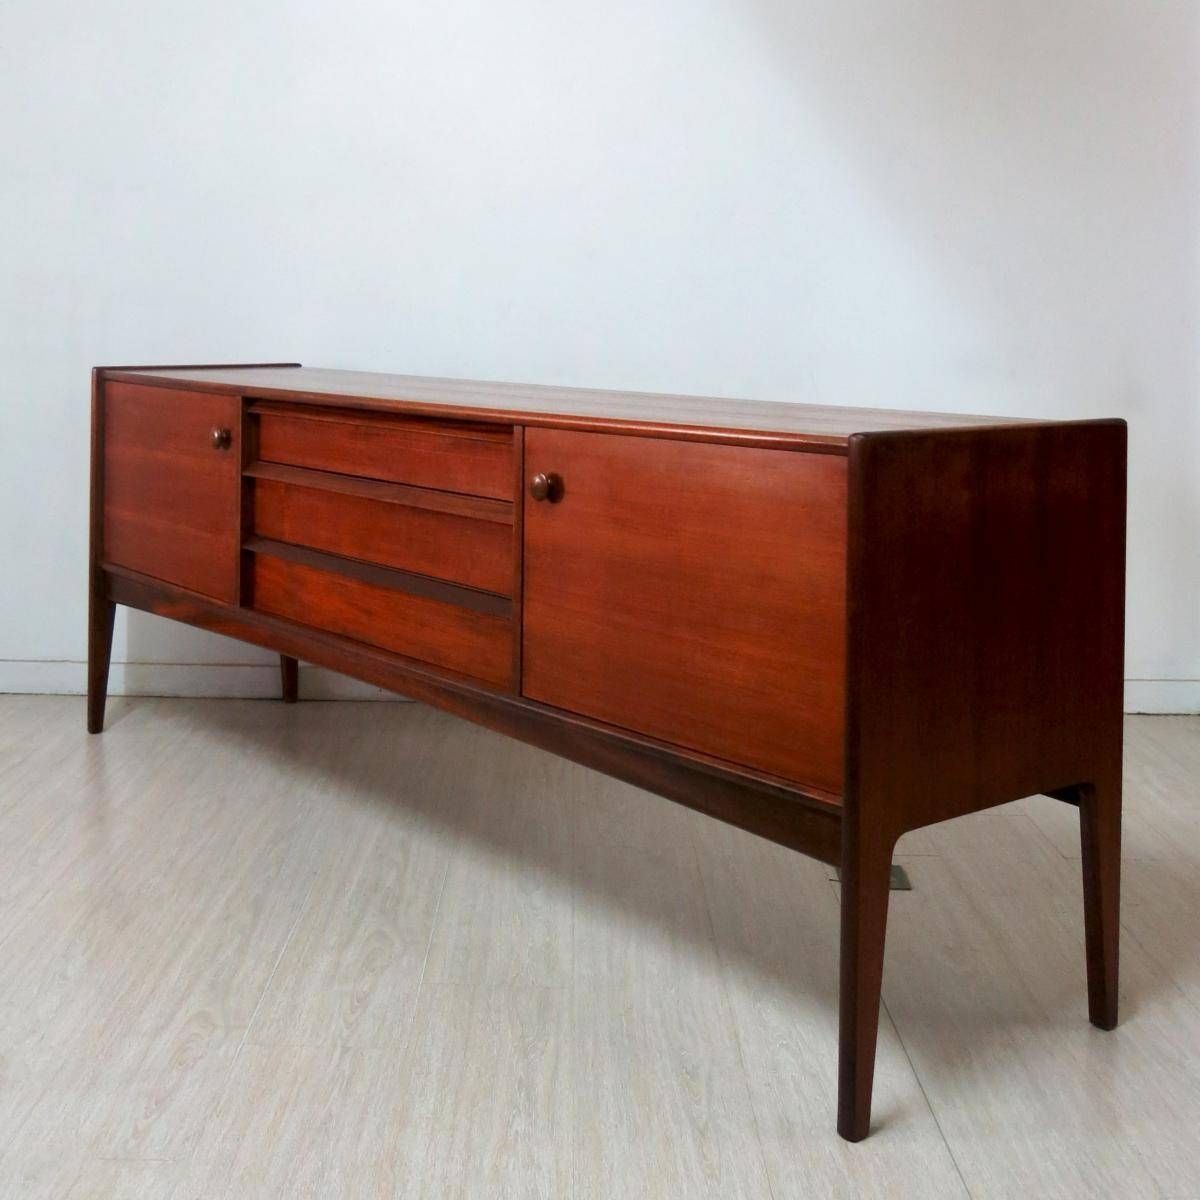 Vintage British Silva Sideboardjohn Herbert For Younger, 1960s With Most Up To Date A Younger Sideboards (View 10 of 15)